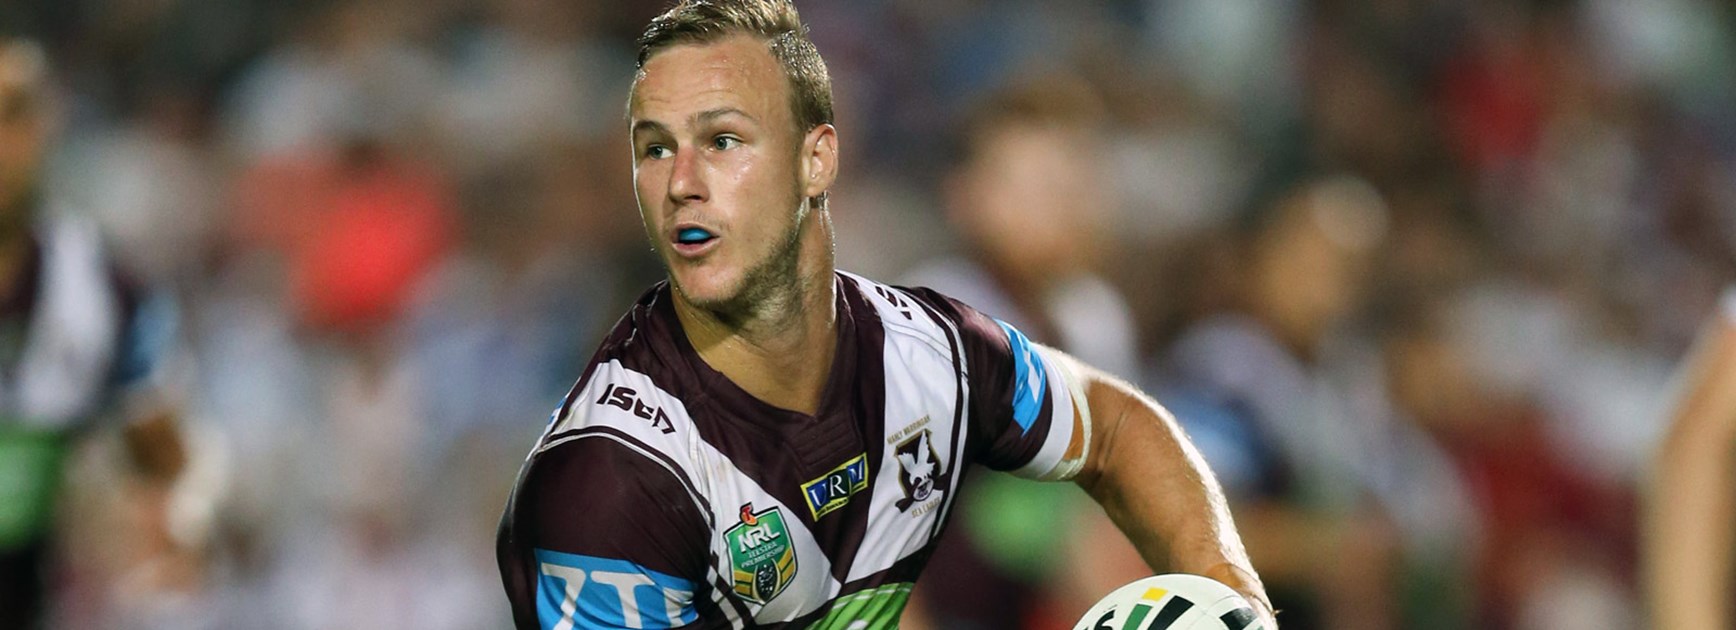 Sea Eagles halfback Daly Cherry-Evans in action against the Bulldogs.